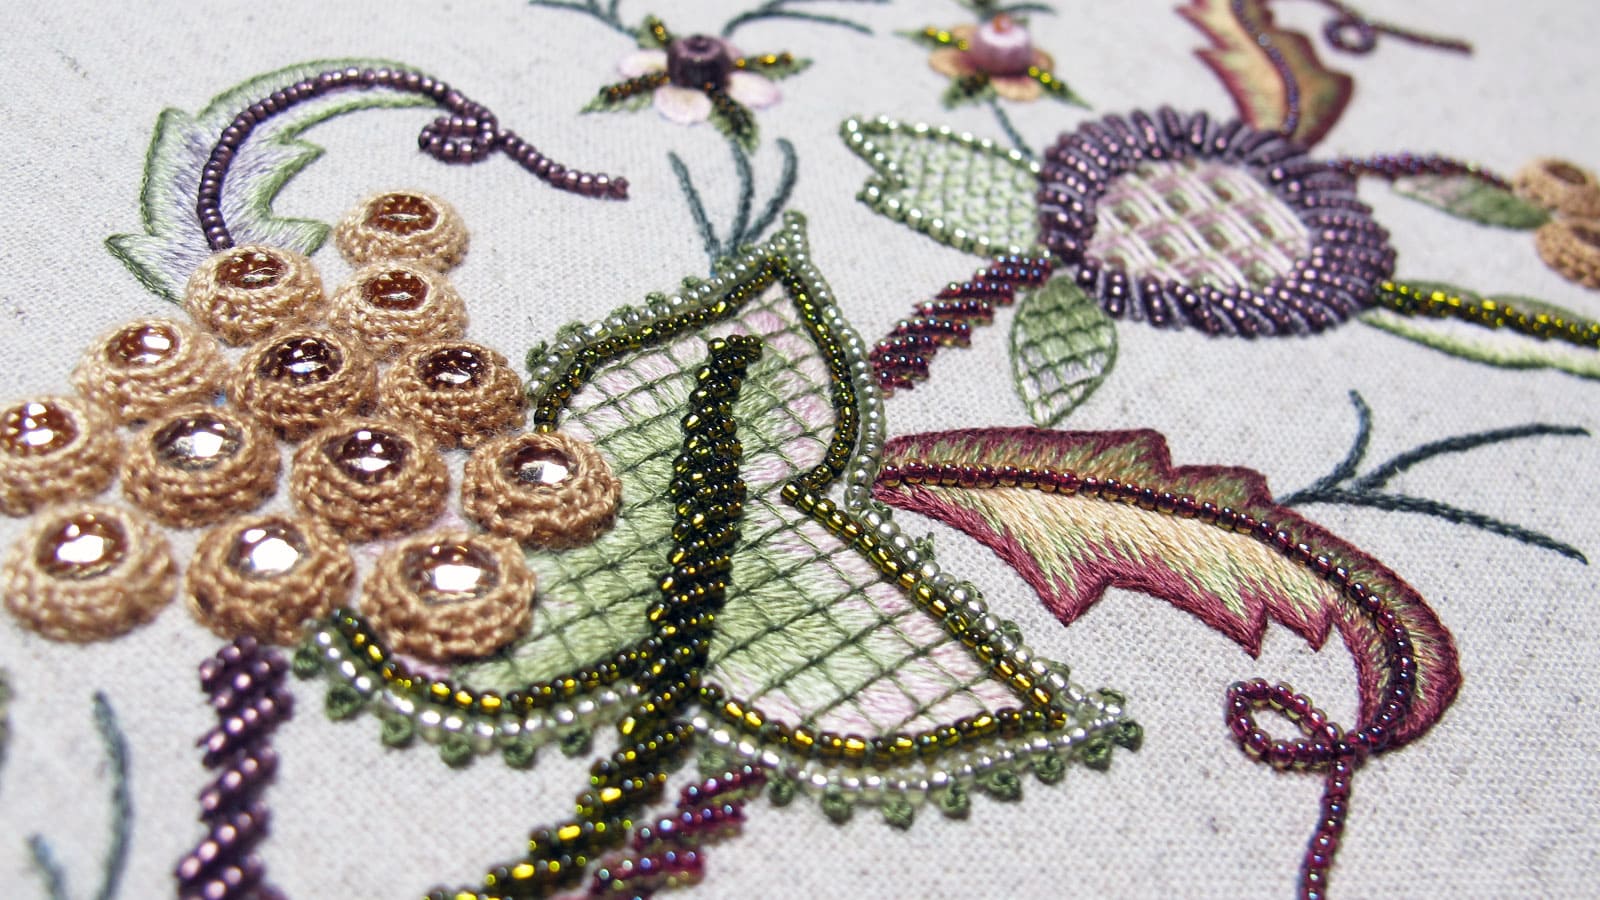 STITCHES in the ROUND Pdf Embroidery Pattern, Embroidery Hoop Art, Hand  Embroidery, Vines and Lines, Folk Art Style, Floral Design, Circle -   Canada